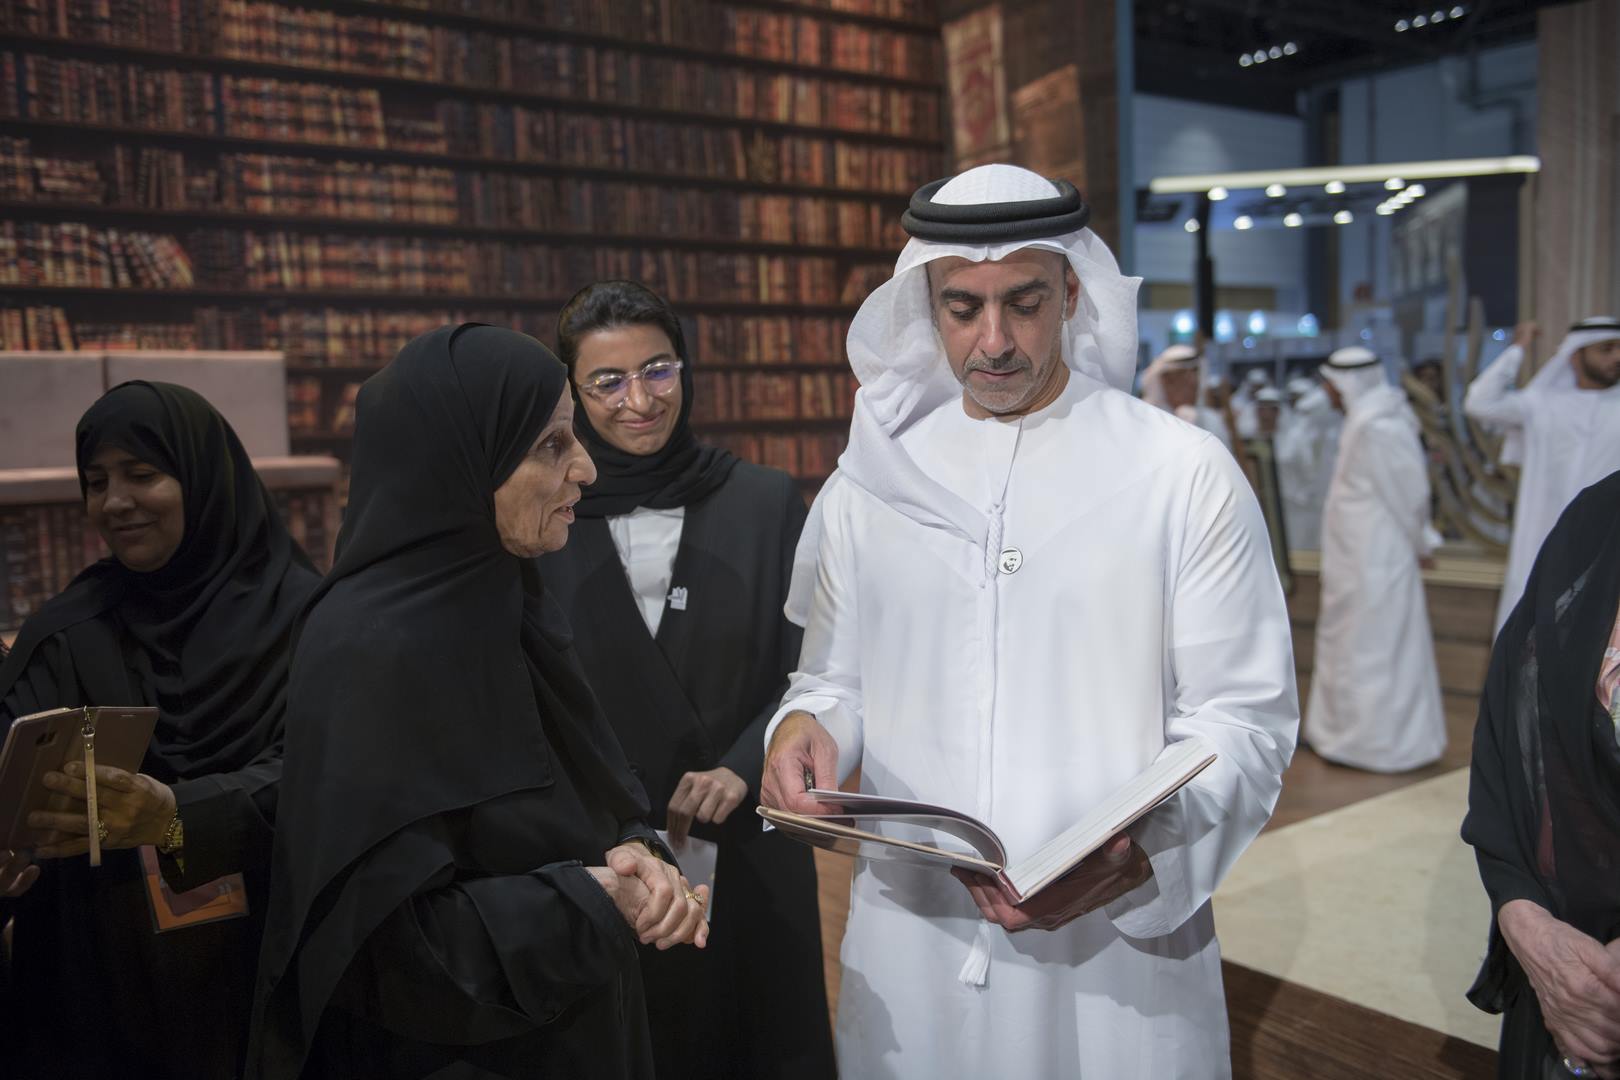 The 29th edition of Abu Dhabi International Book Fair (ADIBF) opens its doors to the public